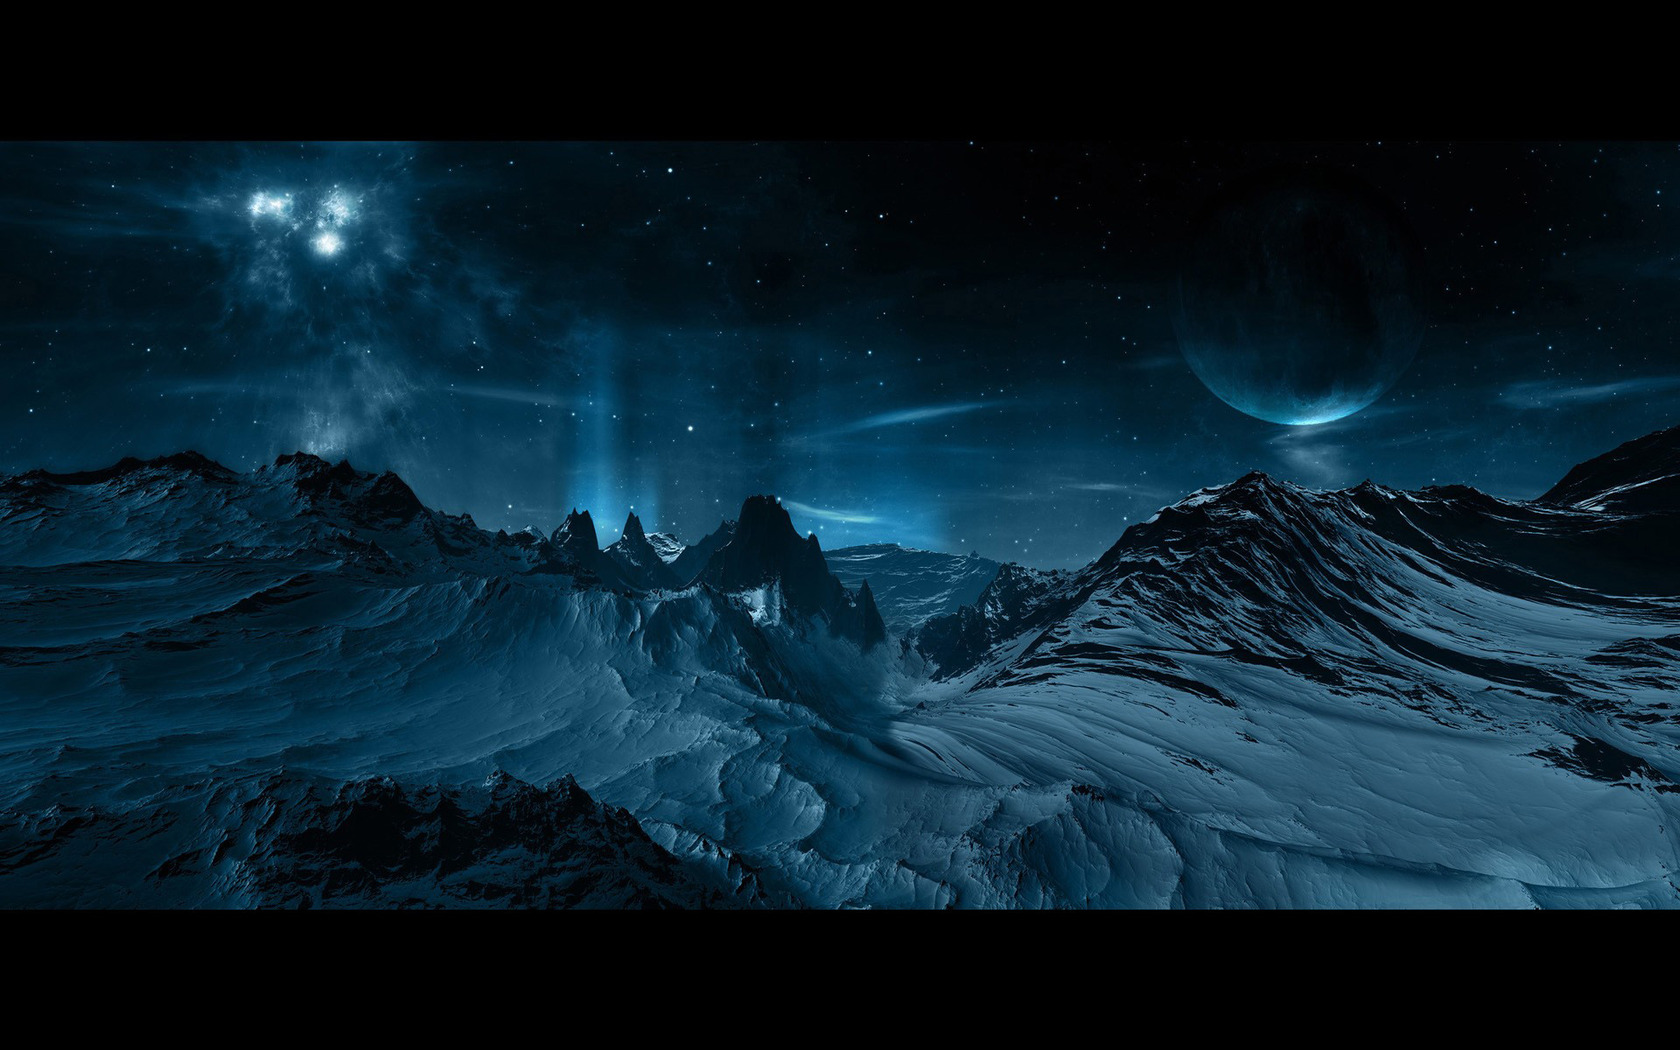 Download Planets above snowy mountains wallpaper